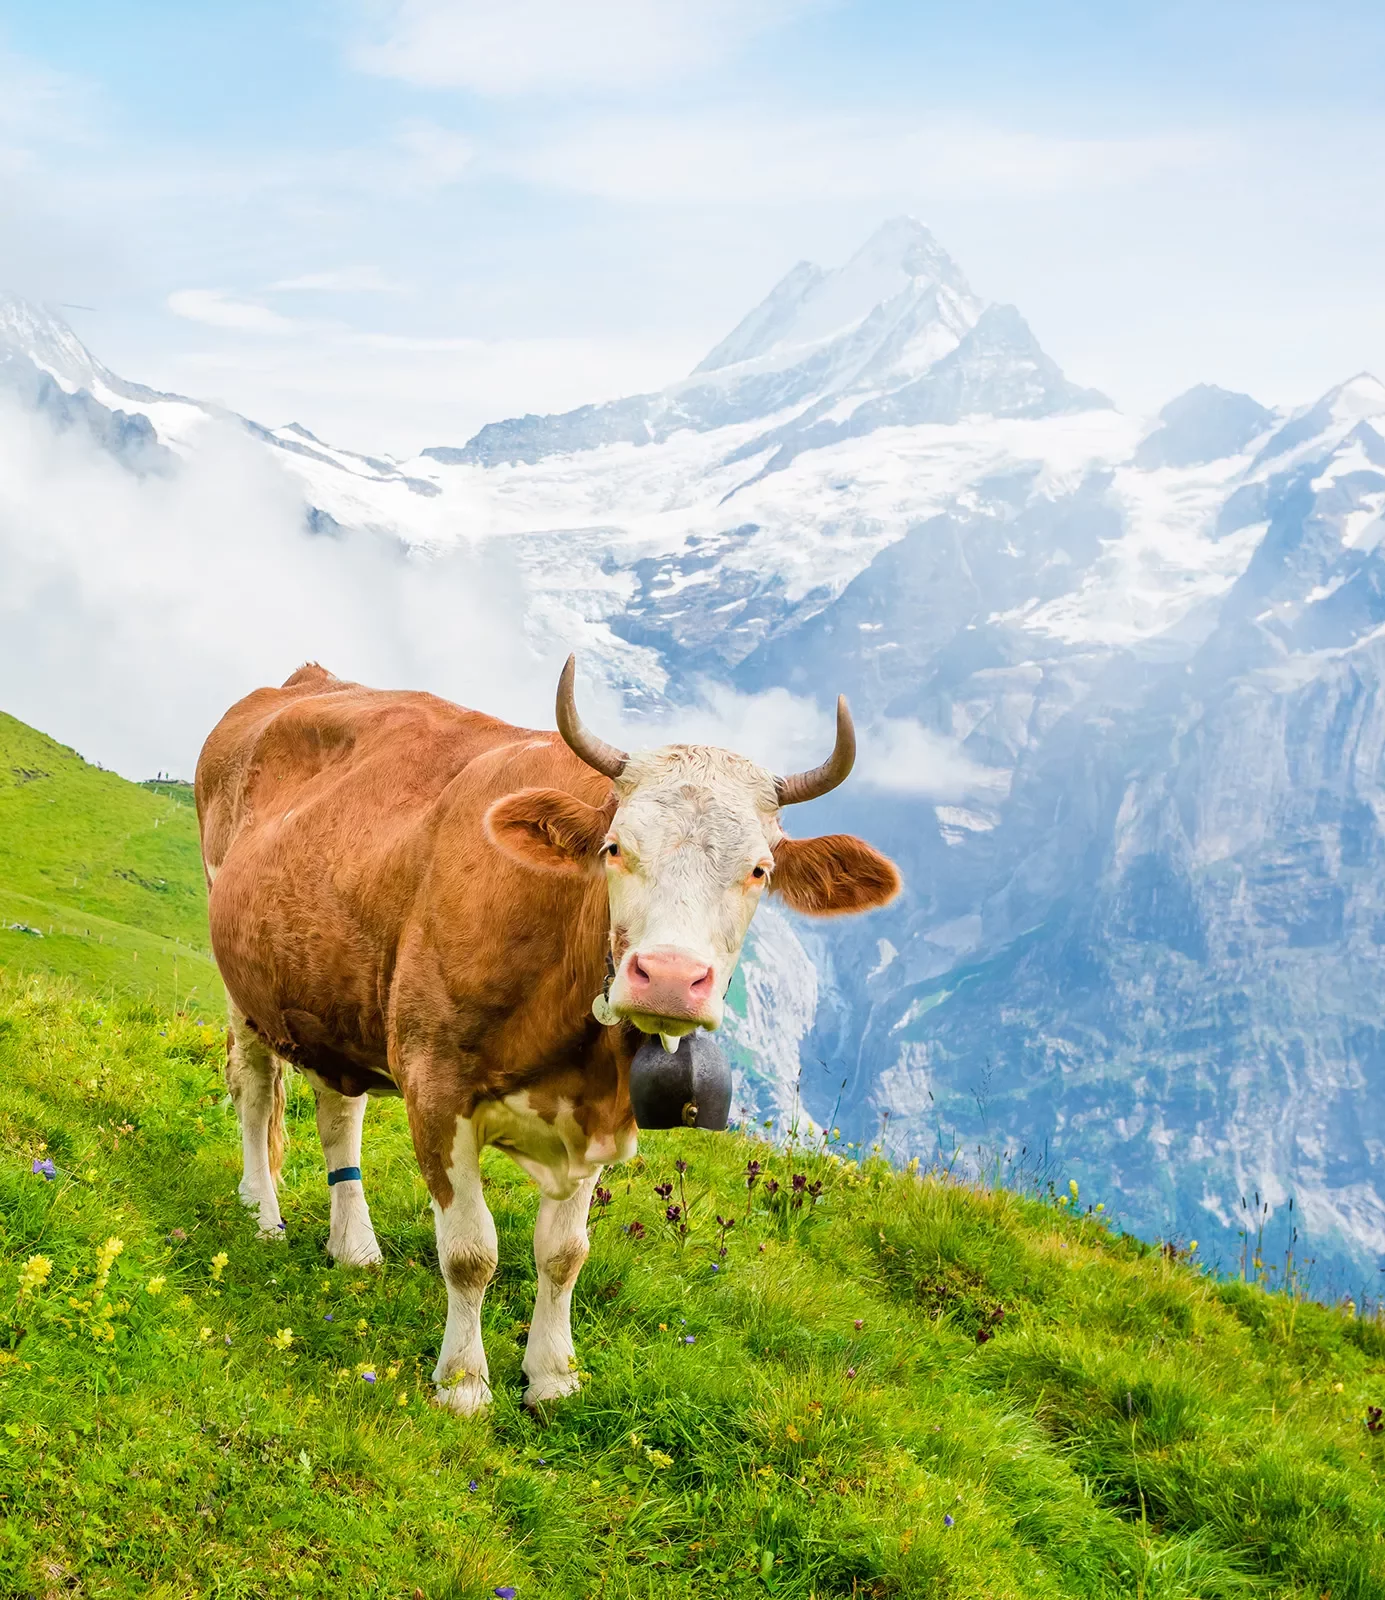 Cow looking at camera, large cliff, mountains behind it.